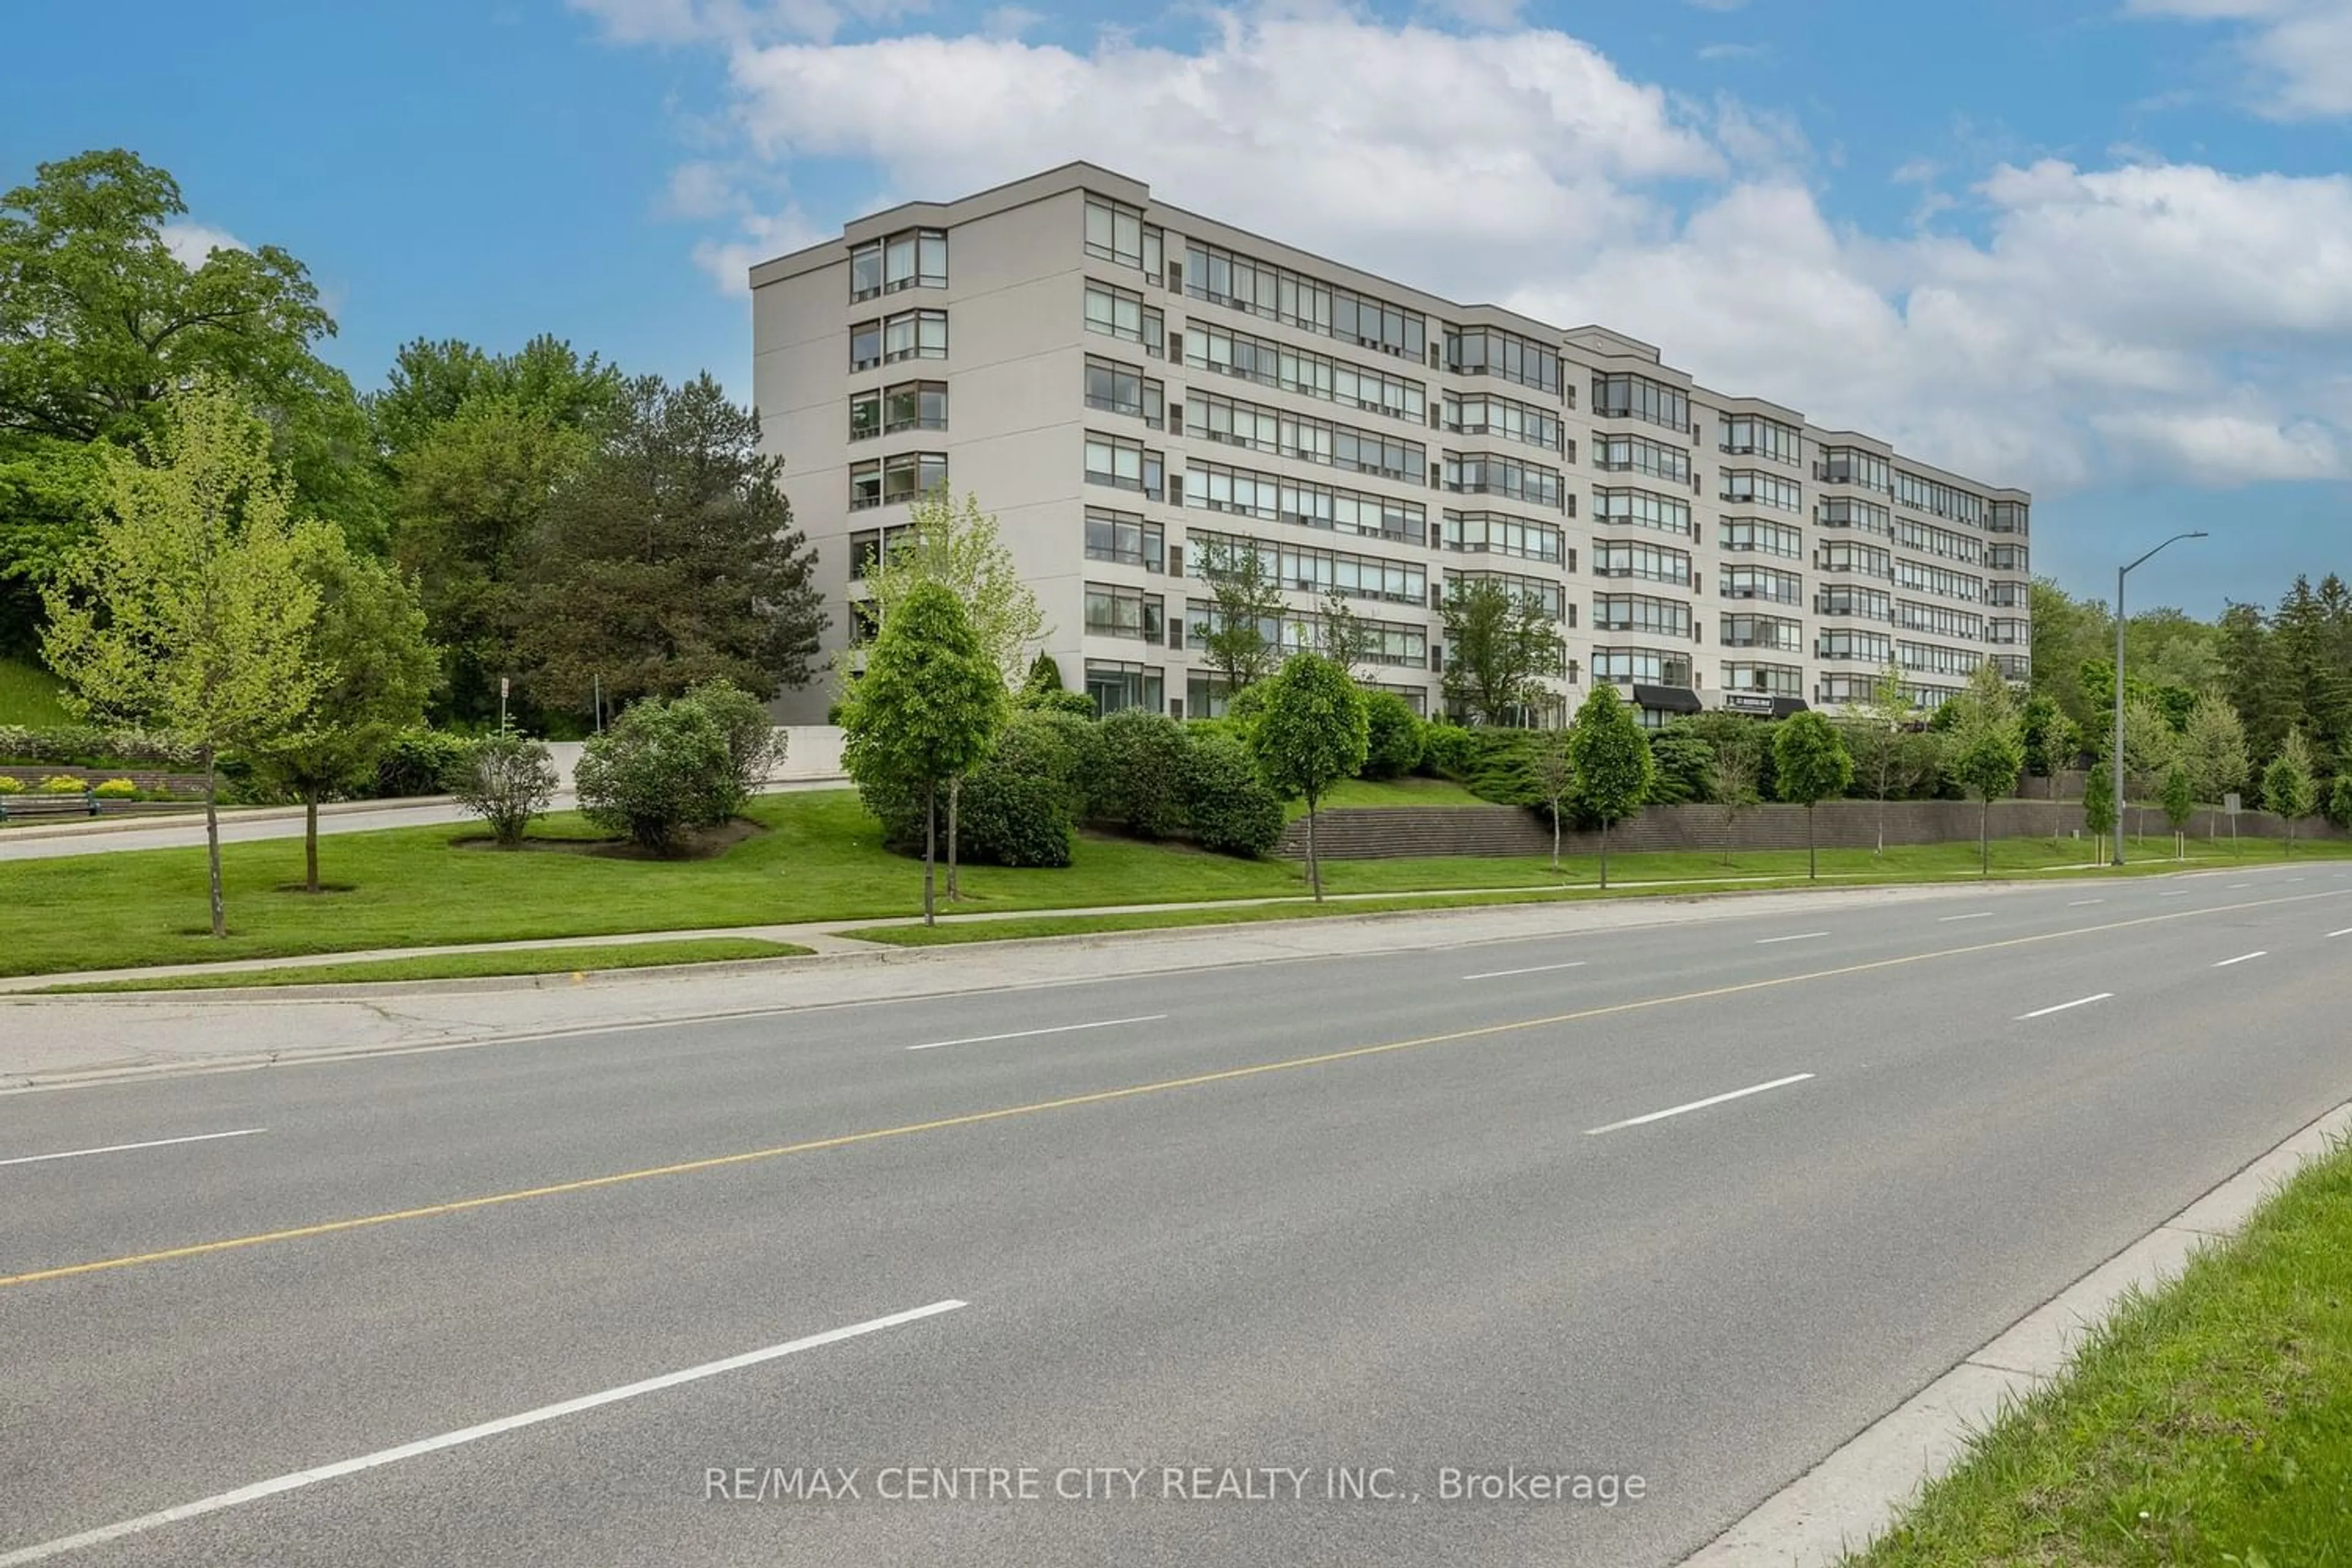 A pic from exterior of the house or condo for 521 Riverside Dr #408, London Ontario N6H 5E2